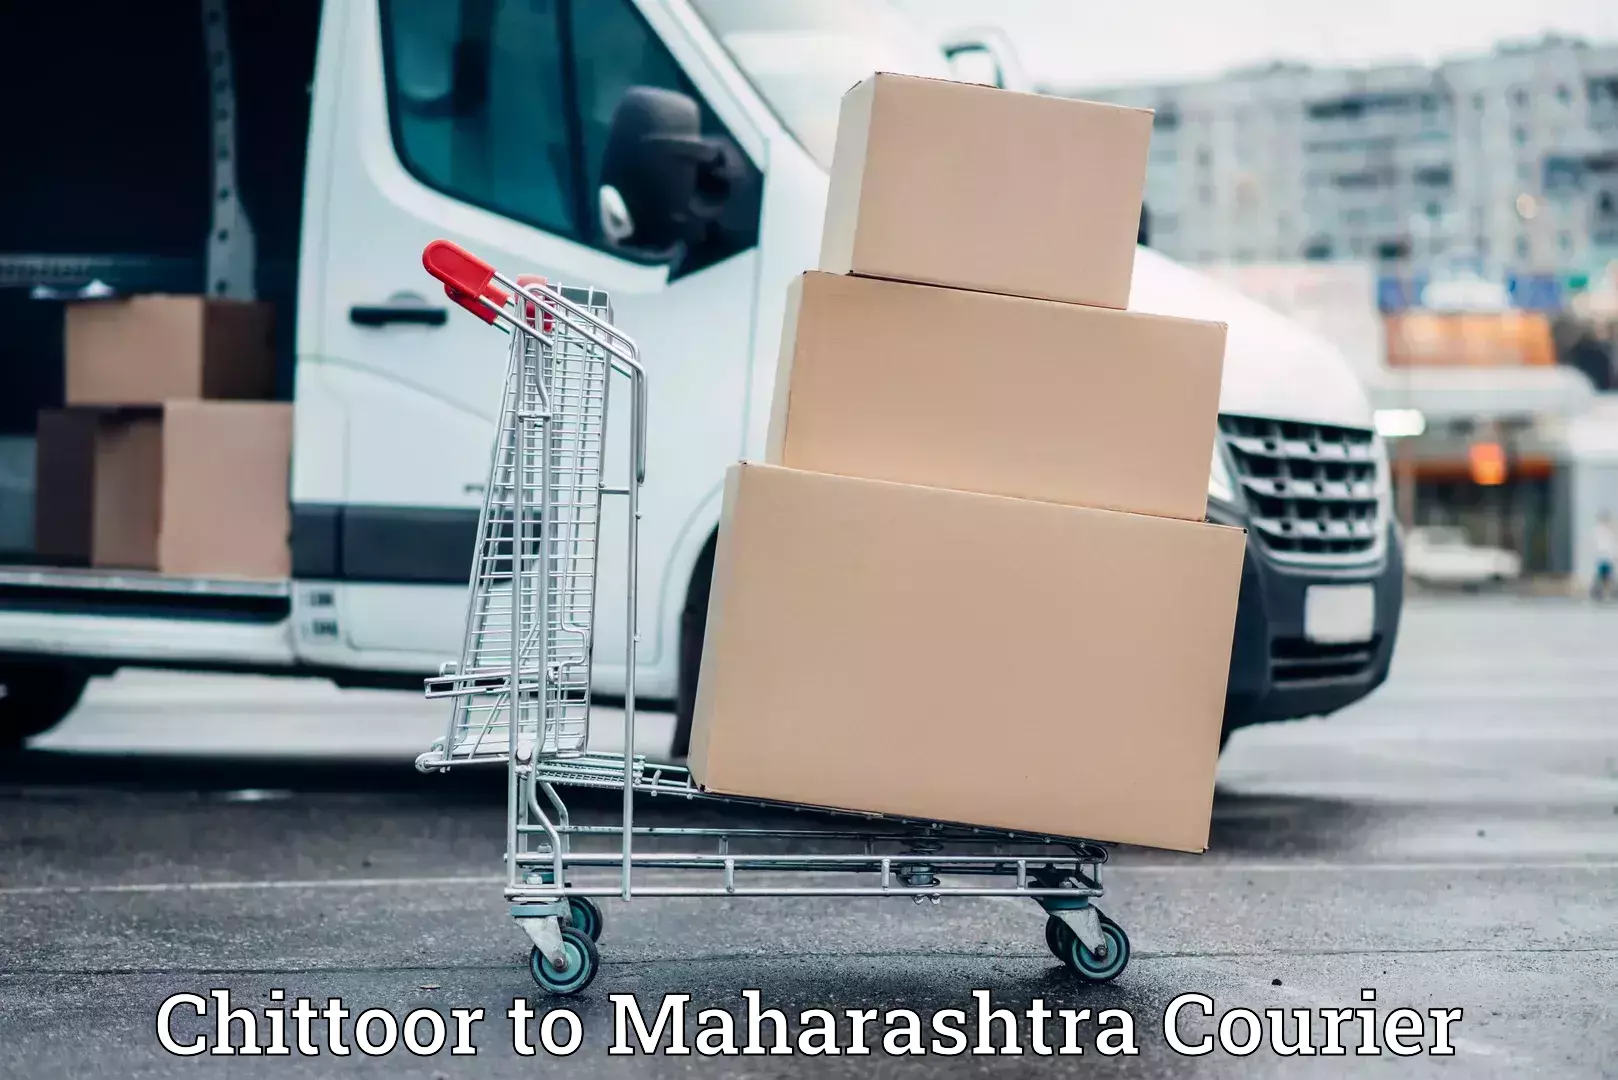 Furniture transport specialists Chittoor to Maharashtra